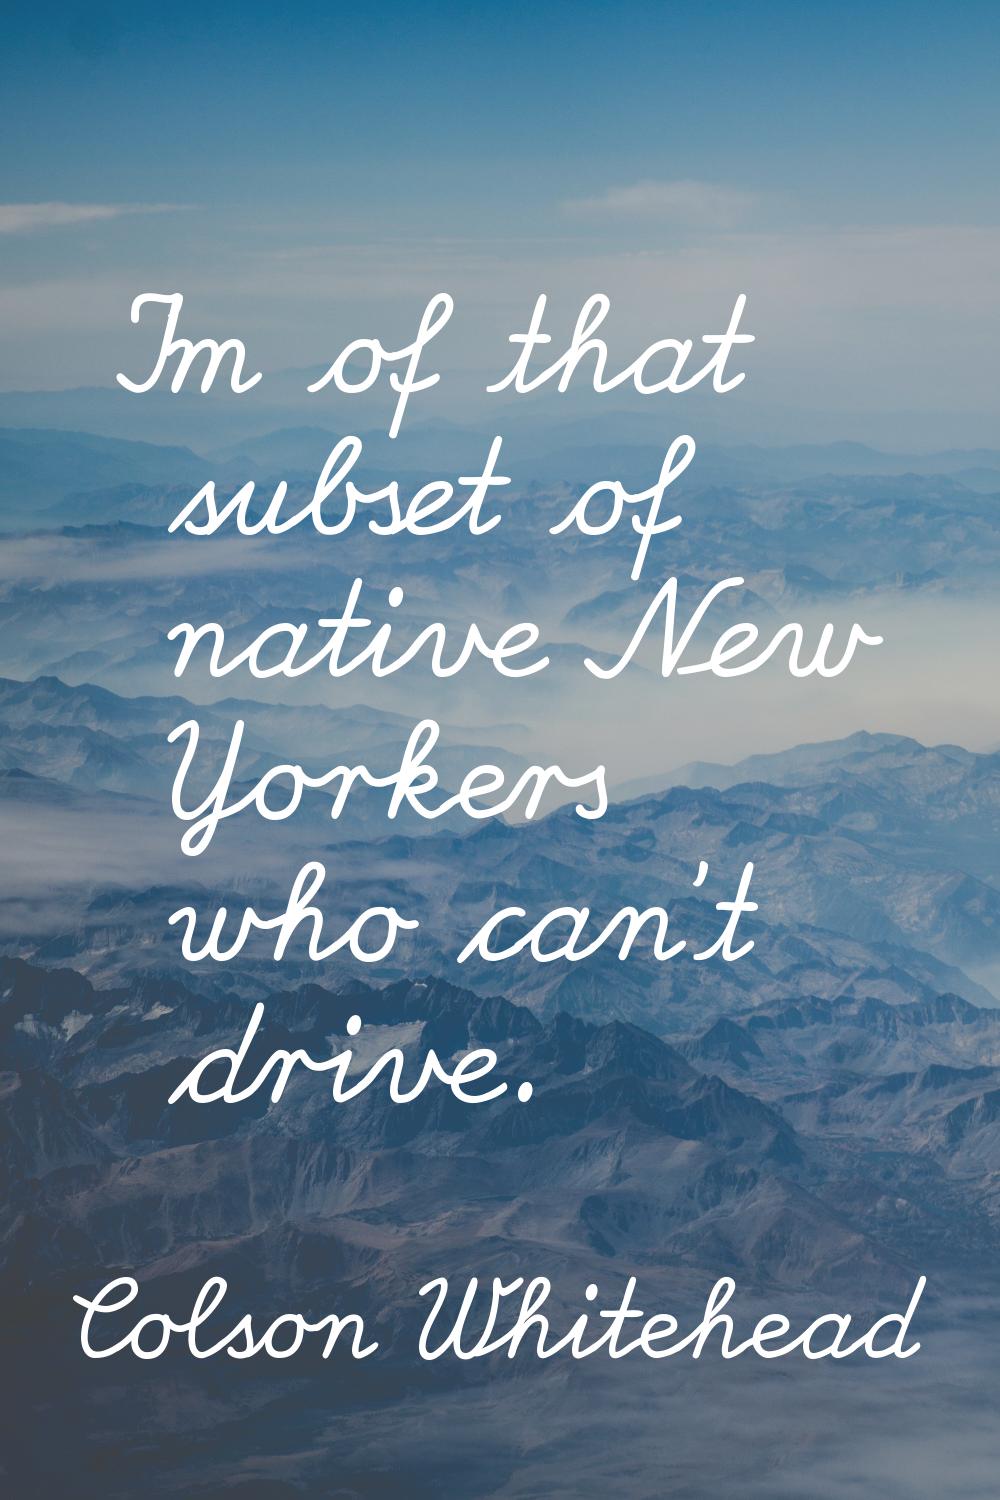 I'm of that subset of native New Yorkers who can't drive.